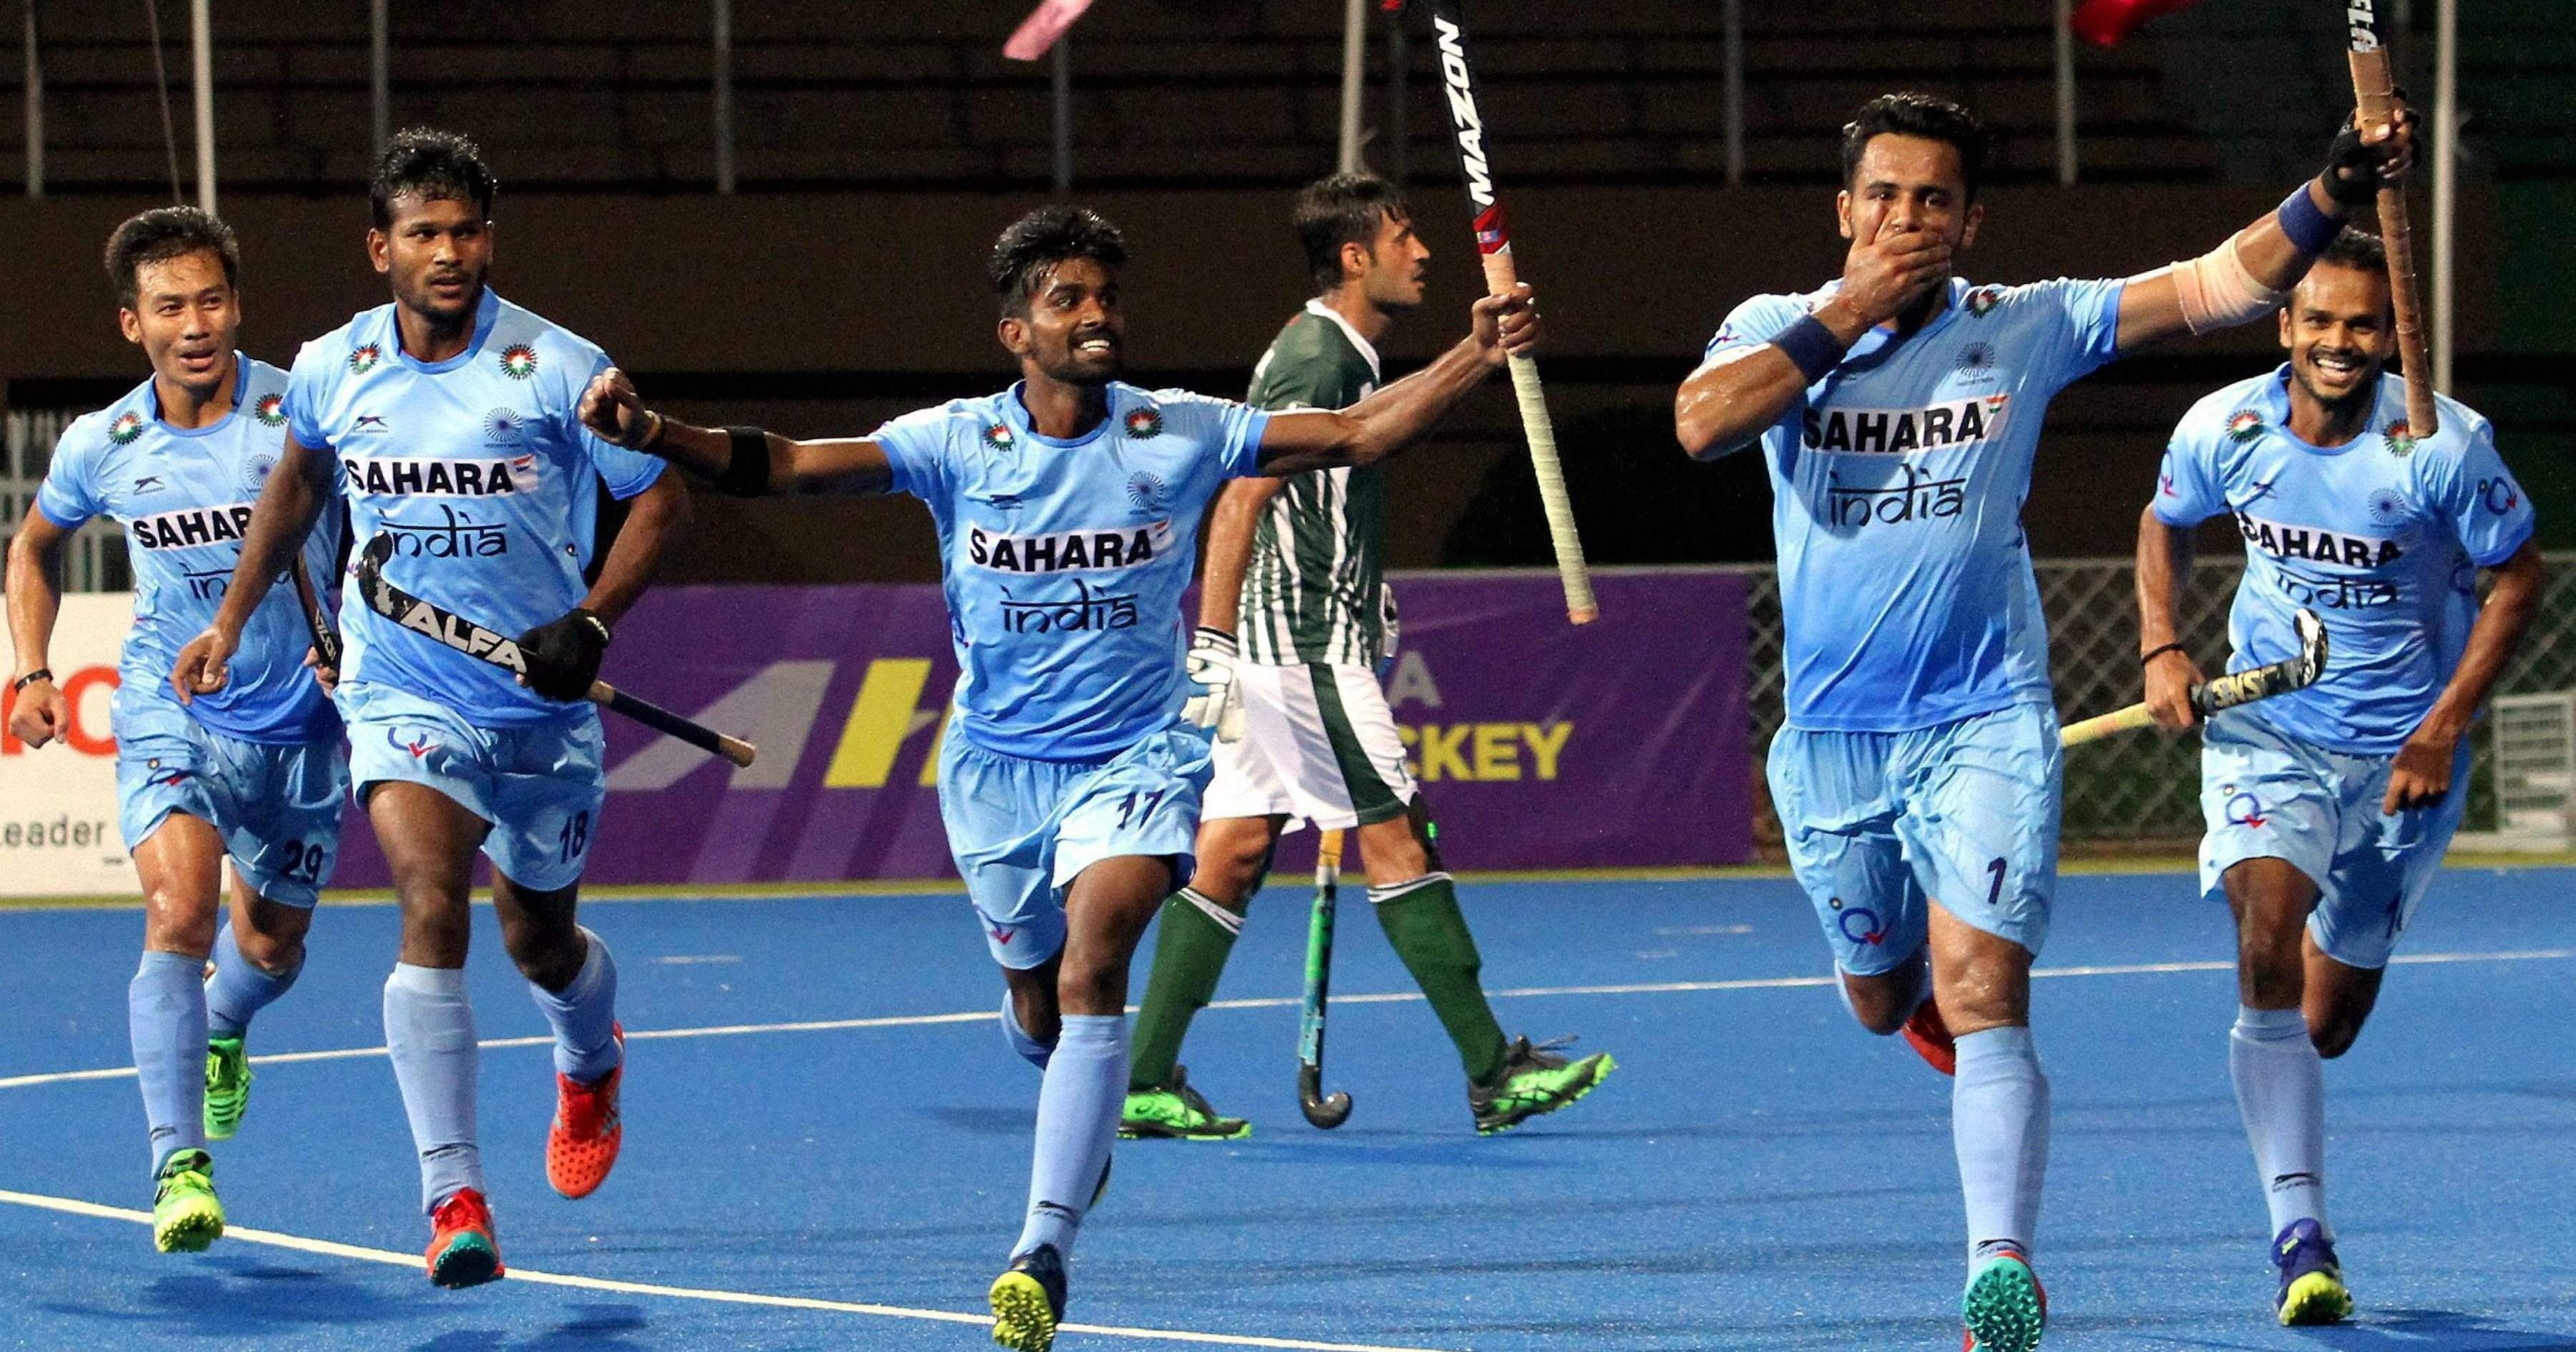 The Indian Hockey Team Aims At Winning The World Cup Here's How It